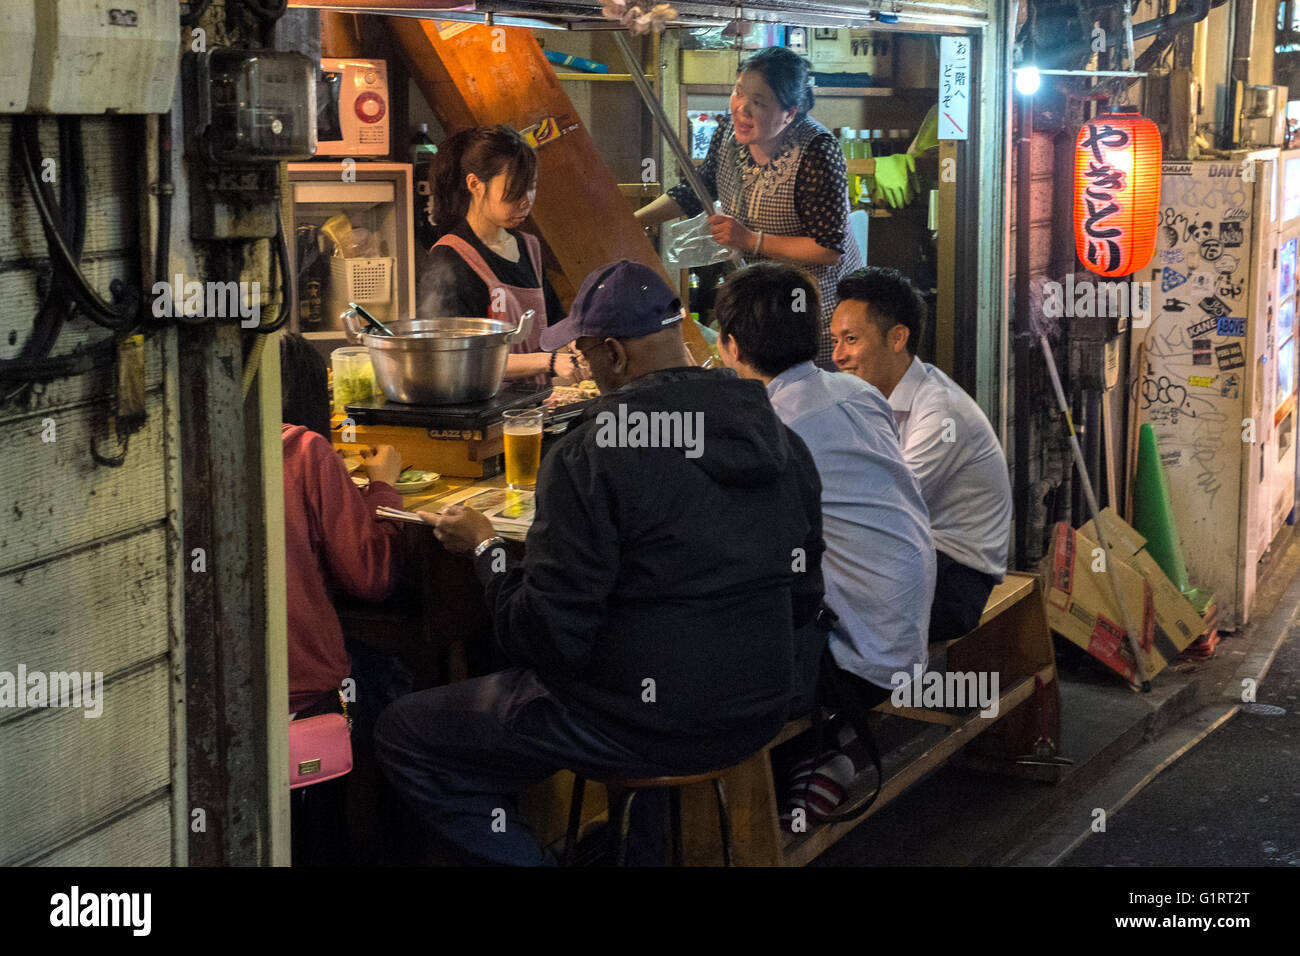 People out eating in Tokyo, Japan Stock Photo